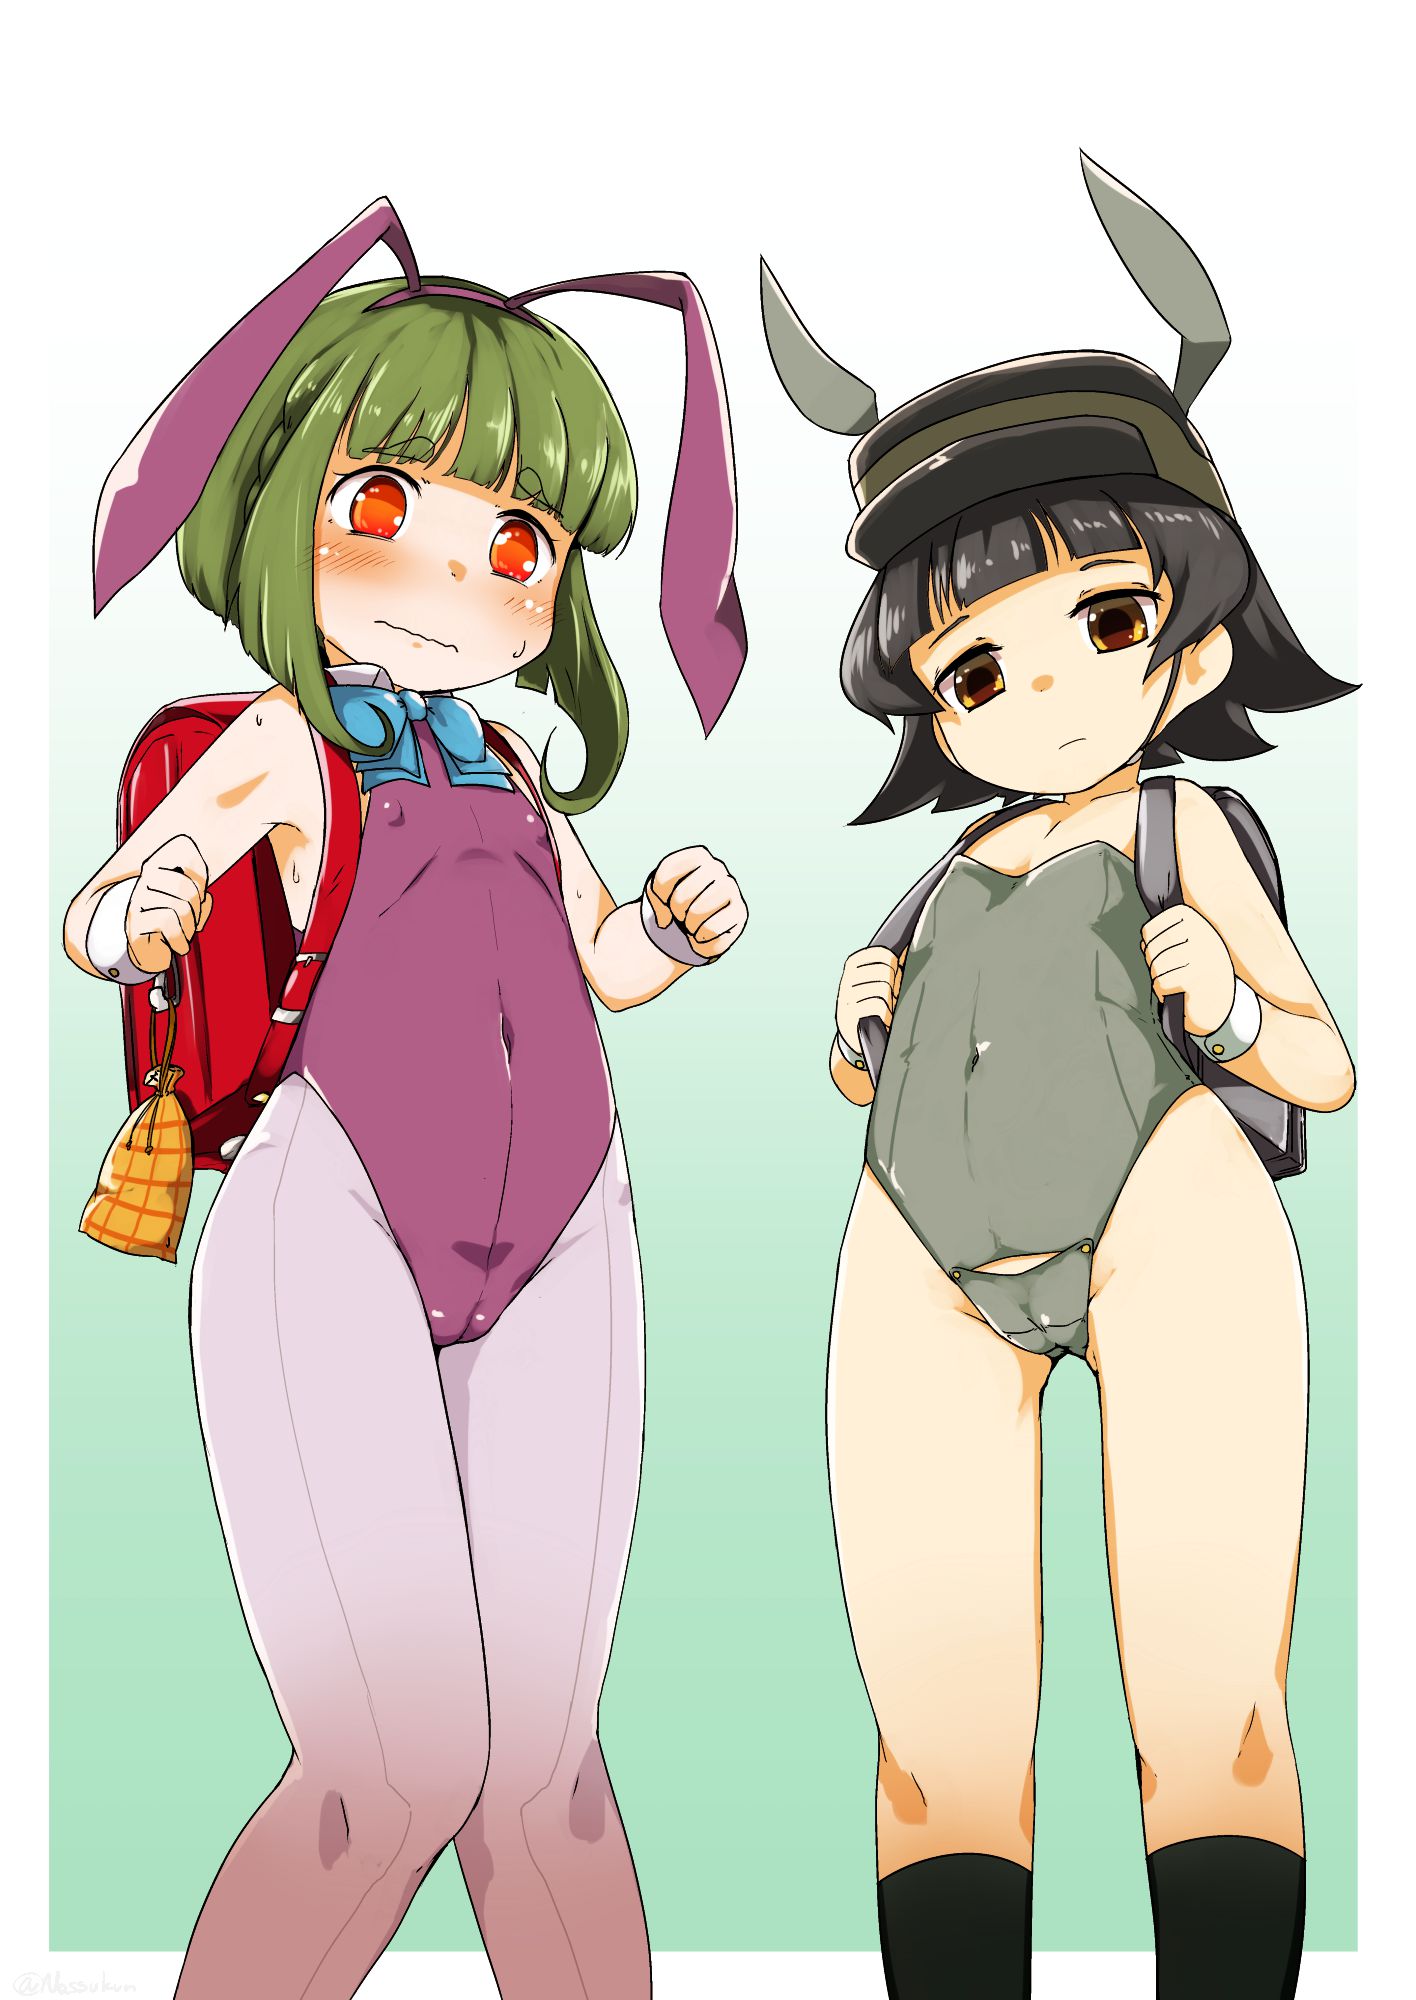 【Lori Bunny-chan】 Secondary erotic image that makes you want to see the moon with Usagi chan in the rabbit ear bunny girl of the secondary loli girl 46